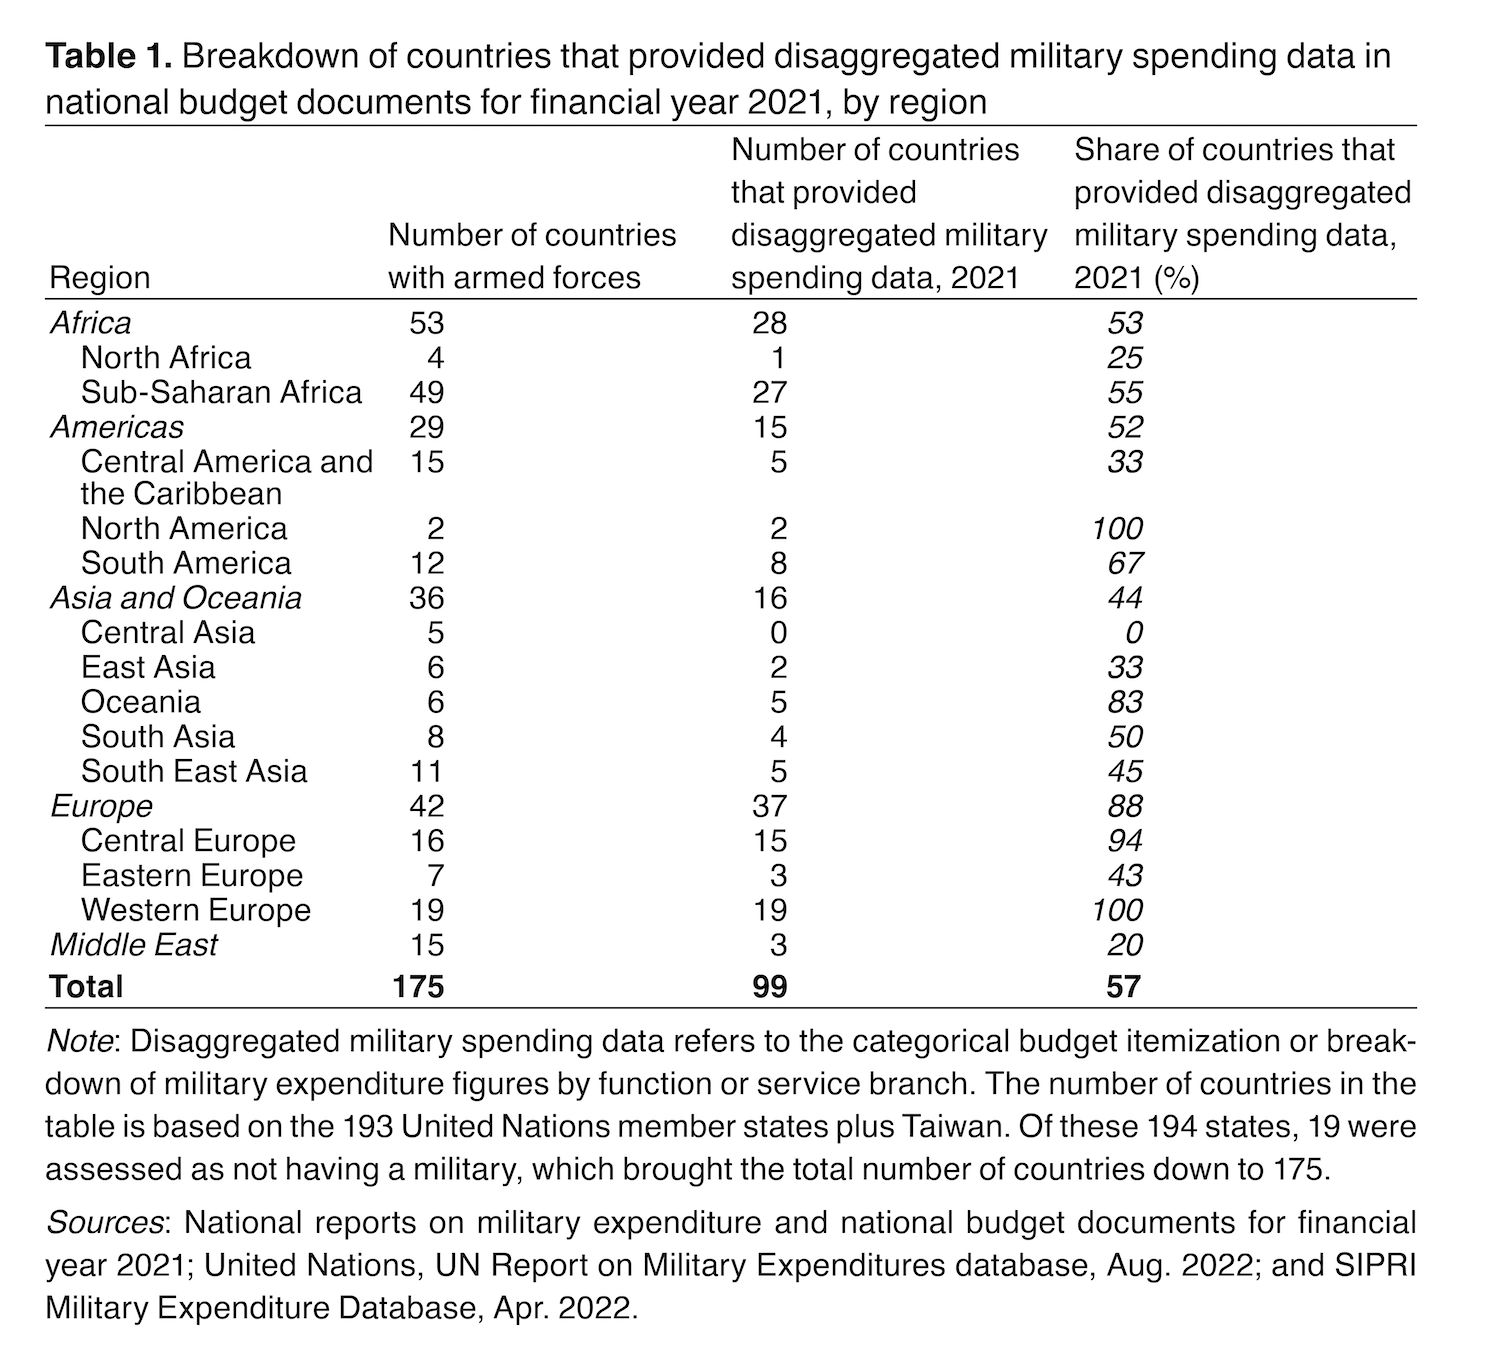 Table 1. Breakdown of countries that provided disaggregated military spending data in national budget documents for financial year 2021, by region